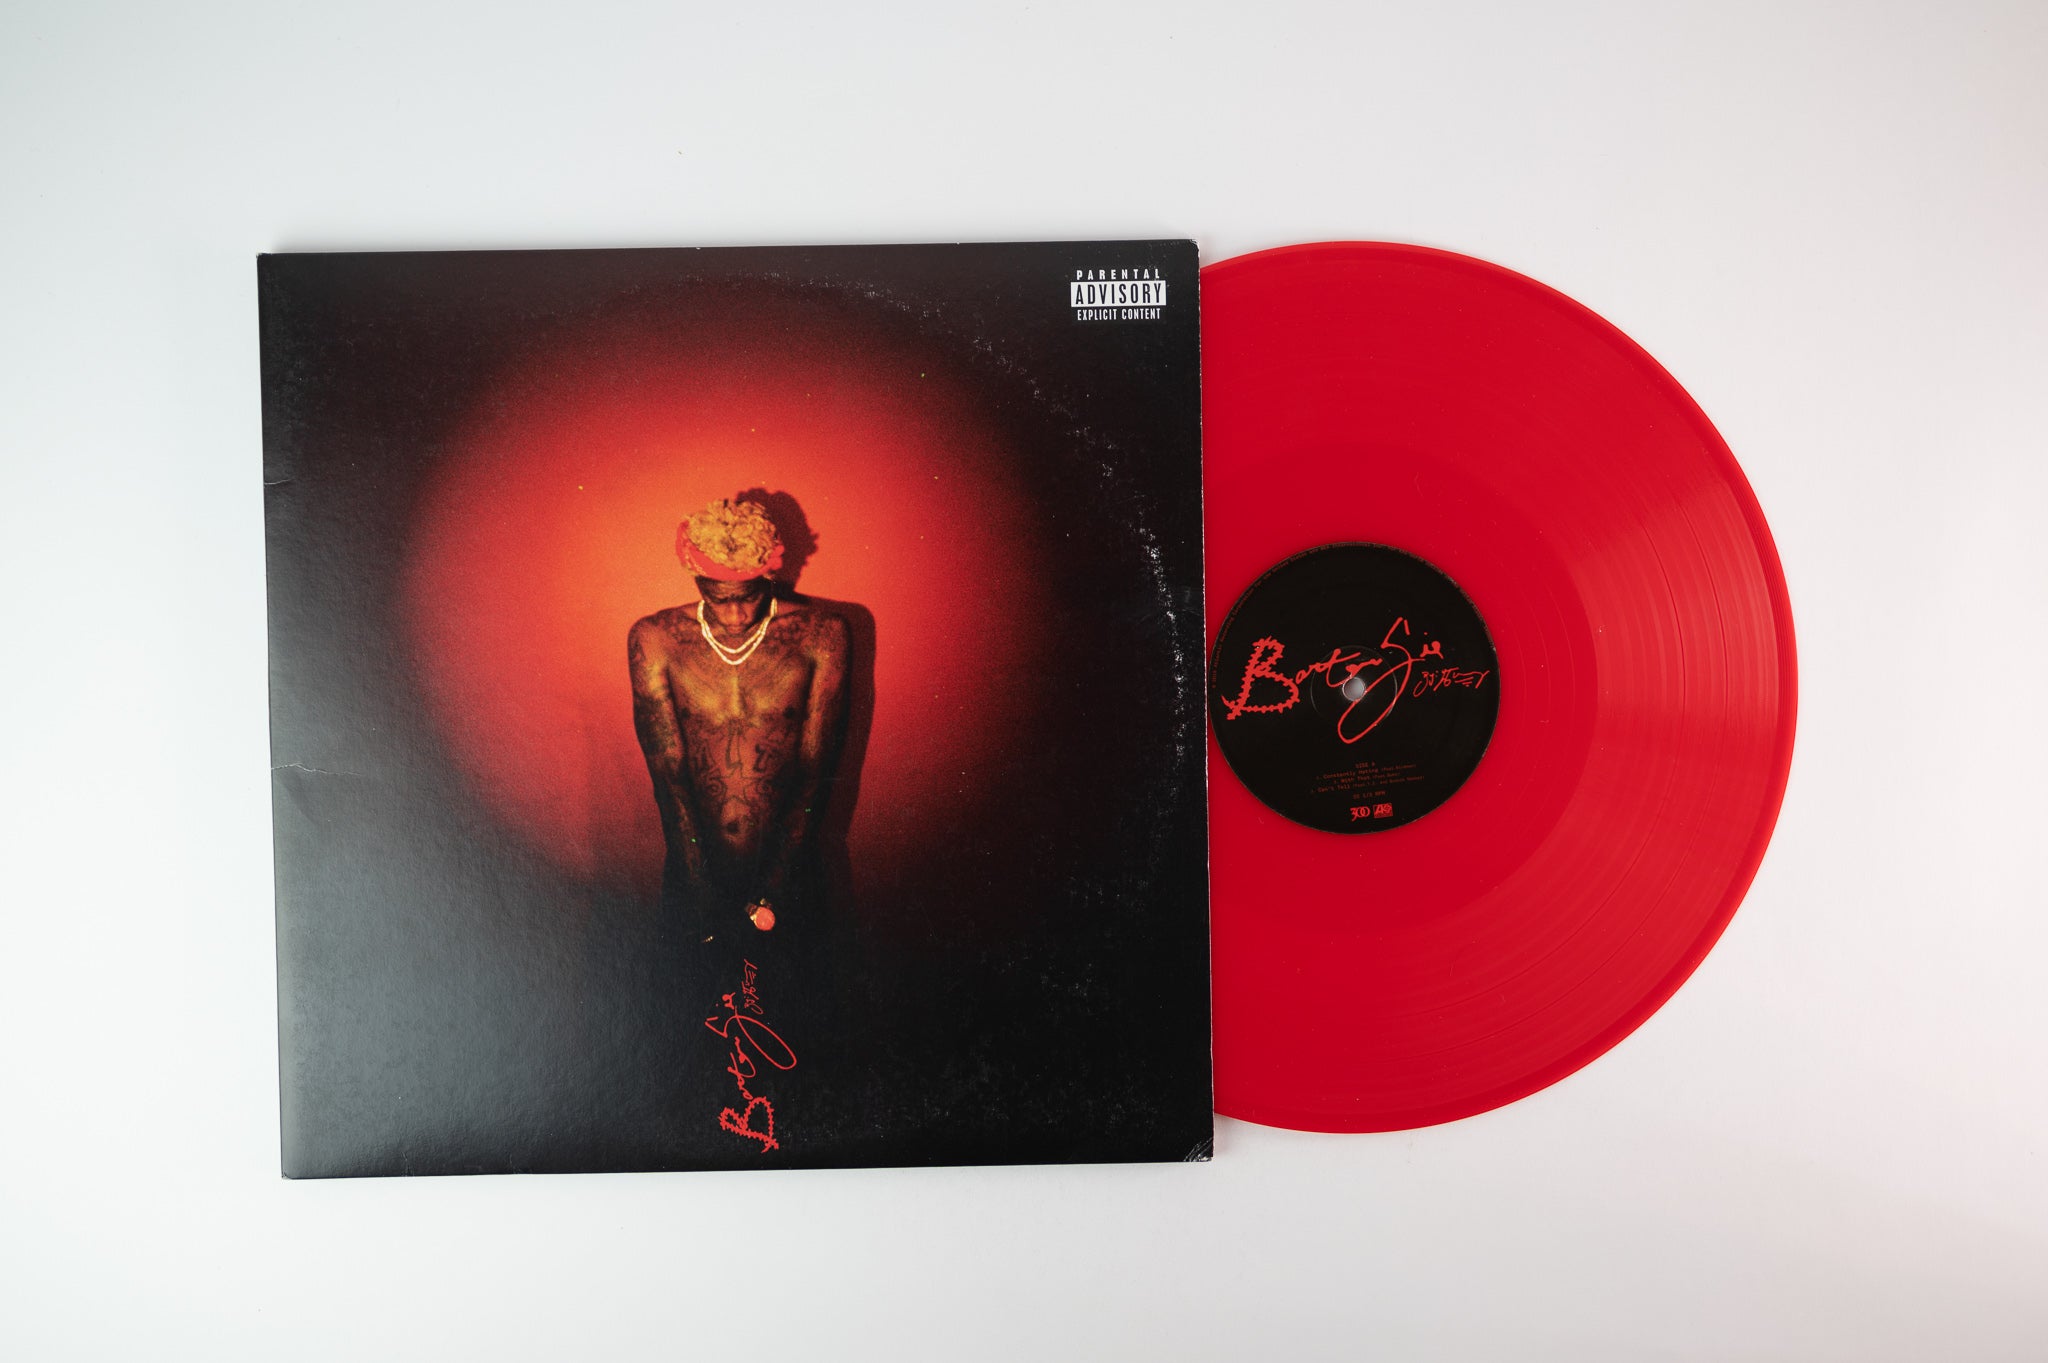 Young Thug - Barter 6 Vinyl Me Please Limited Red Vinyl Numbered